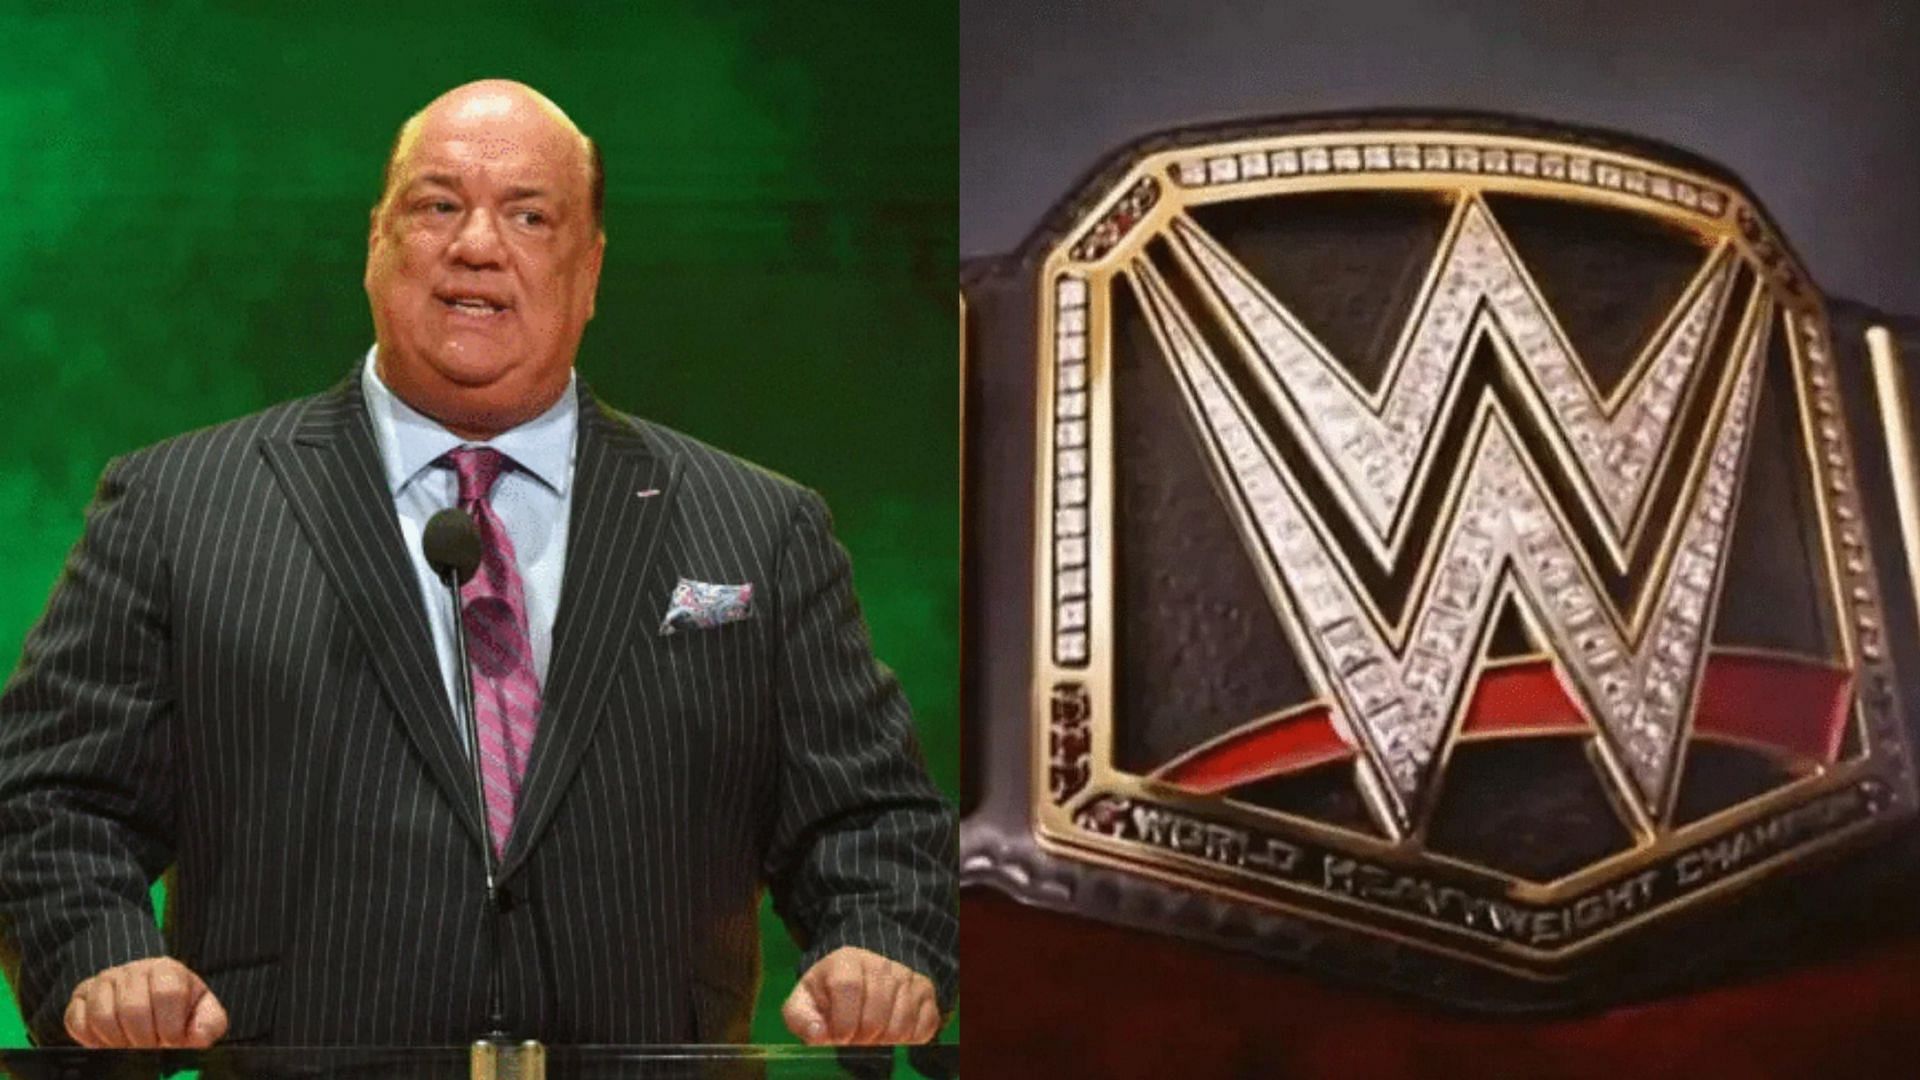 Paul Heyman is the special counsel to Roman Reigns.